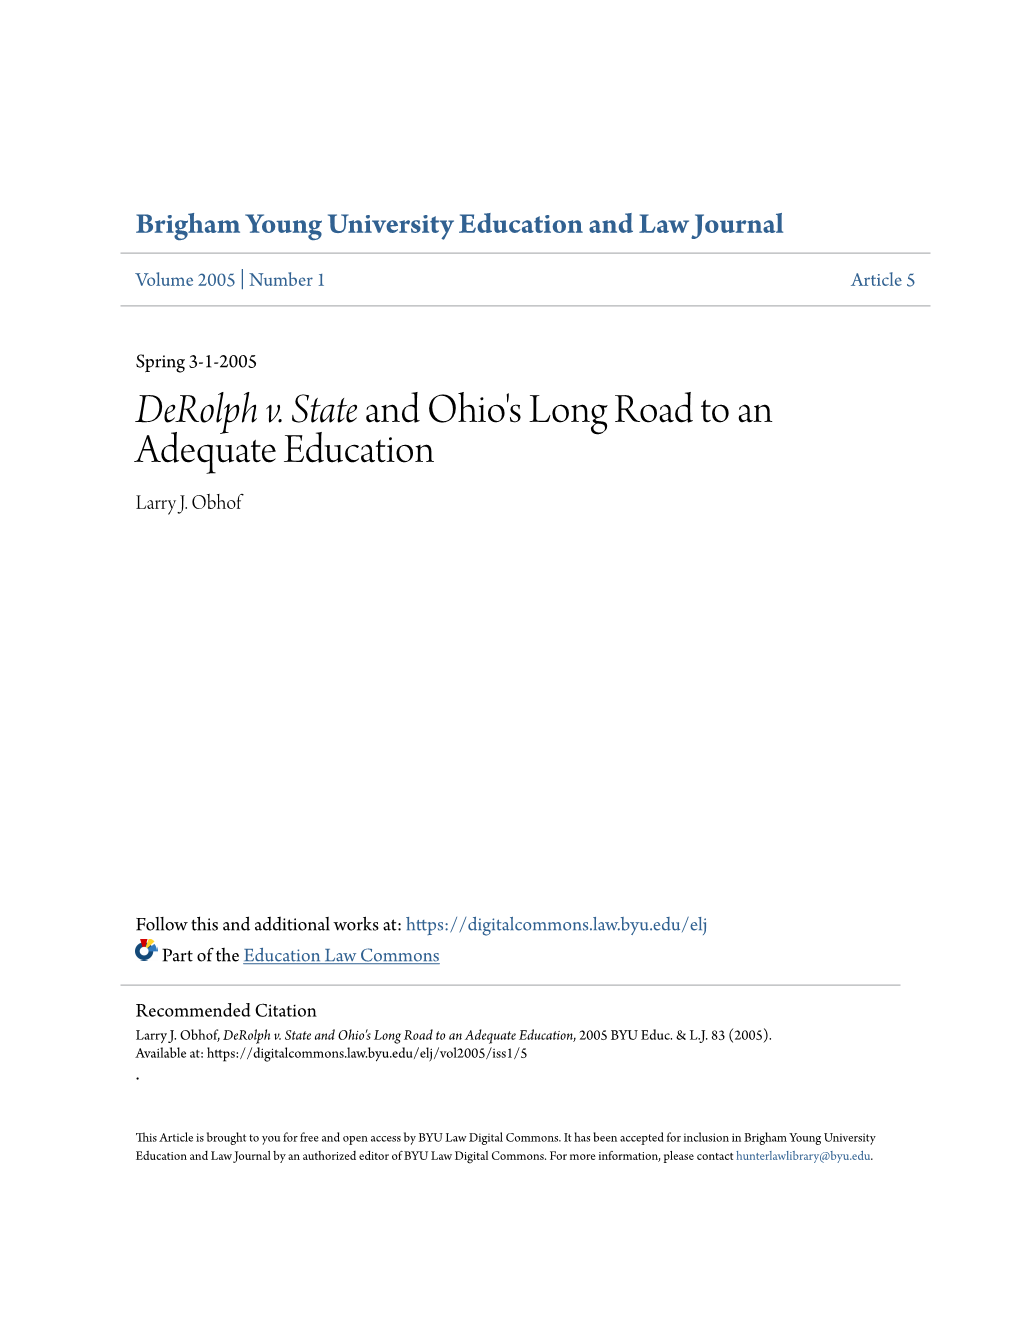 Derolph V. State and Ohio's Long Road to an Adequate Education Larry J